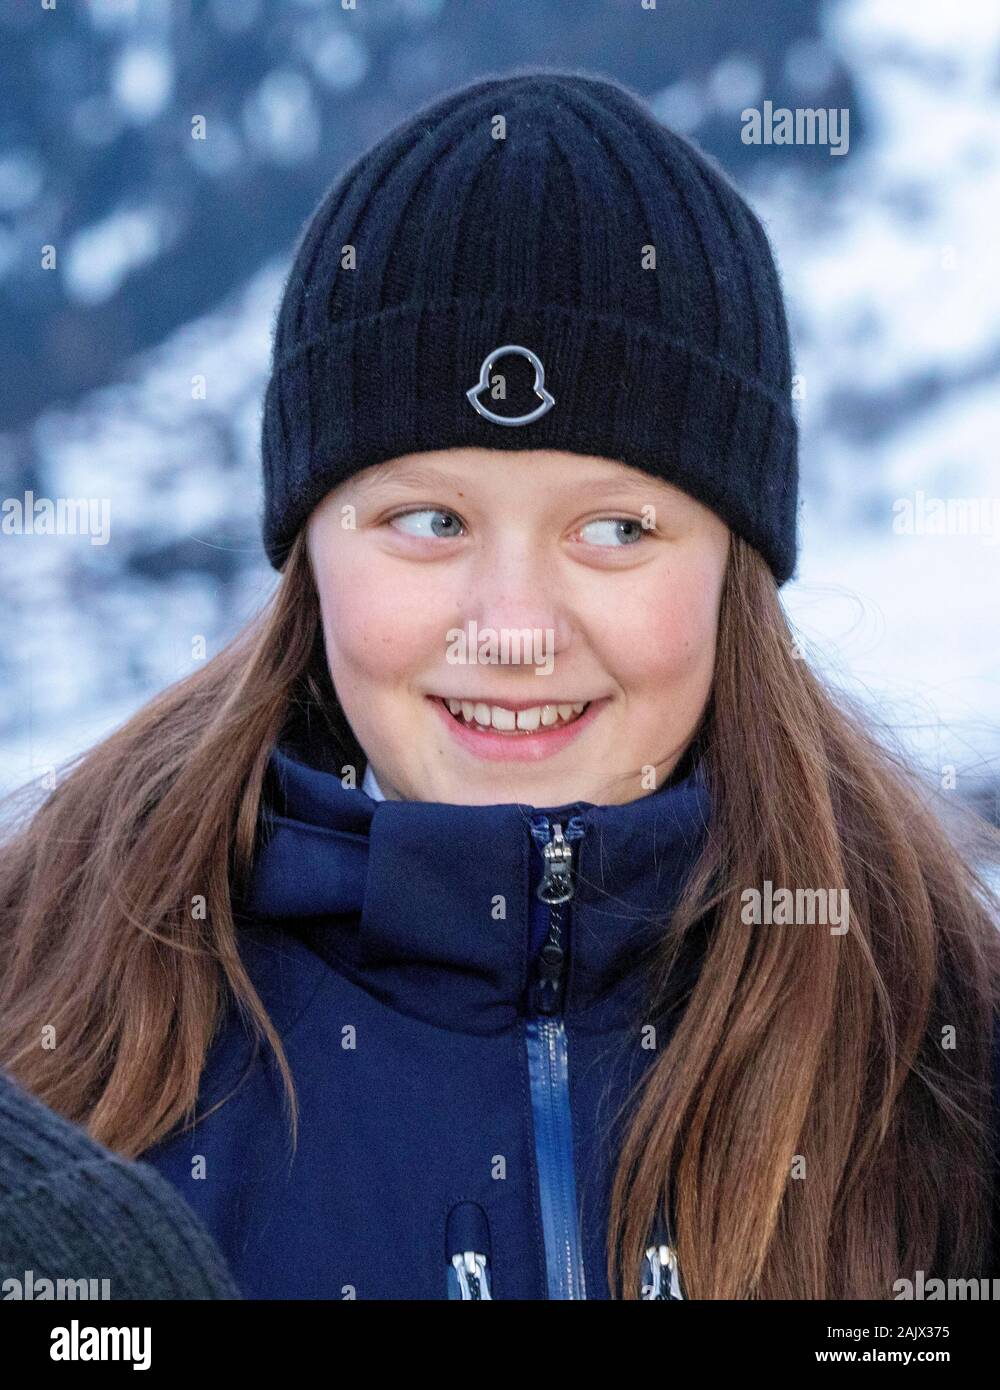 verbier-switzerland-06th-jan-2020-princess-isabella-of-denmark-arrive-at-the-lemania-verbier-international-school-in-verbier-on-january-6-2020-at-the-1st-day-for-a-12-week-stay-at-the-school-credit-albert-nieboer-netherlands-outpoint-de-vue-out-dpaalamy-live-news-2AJX375.jpg